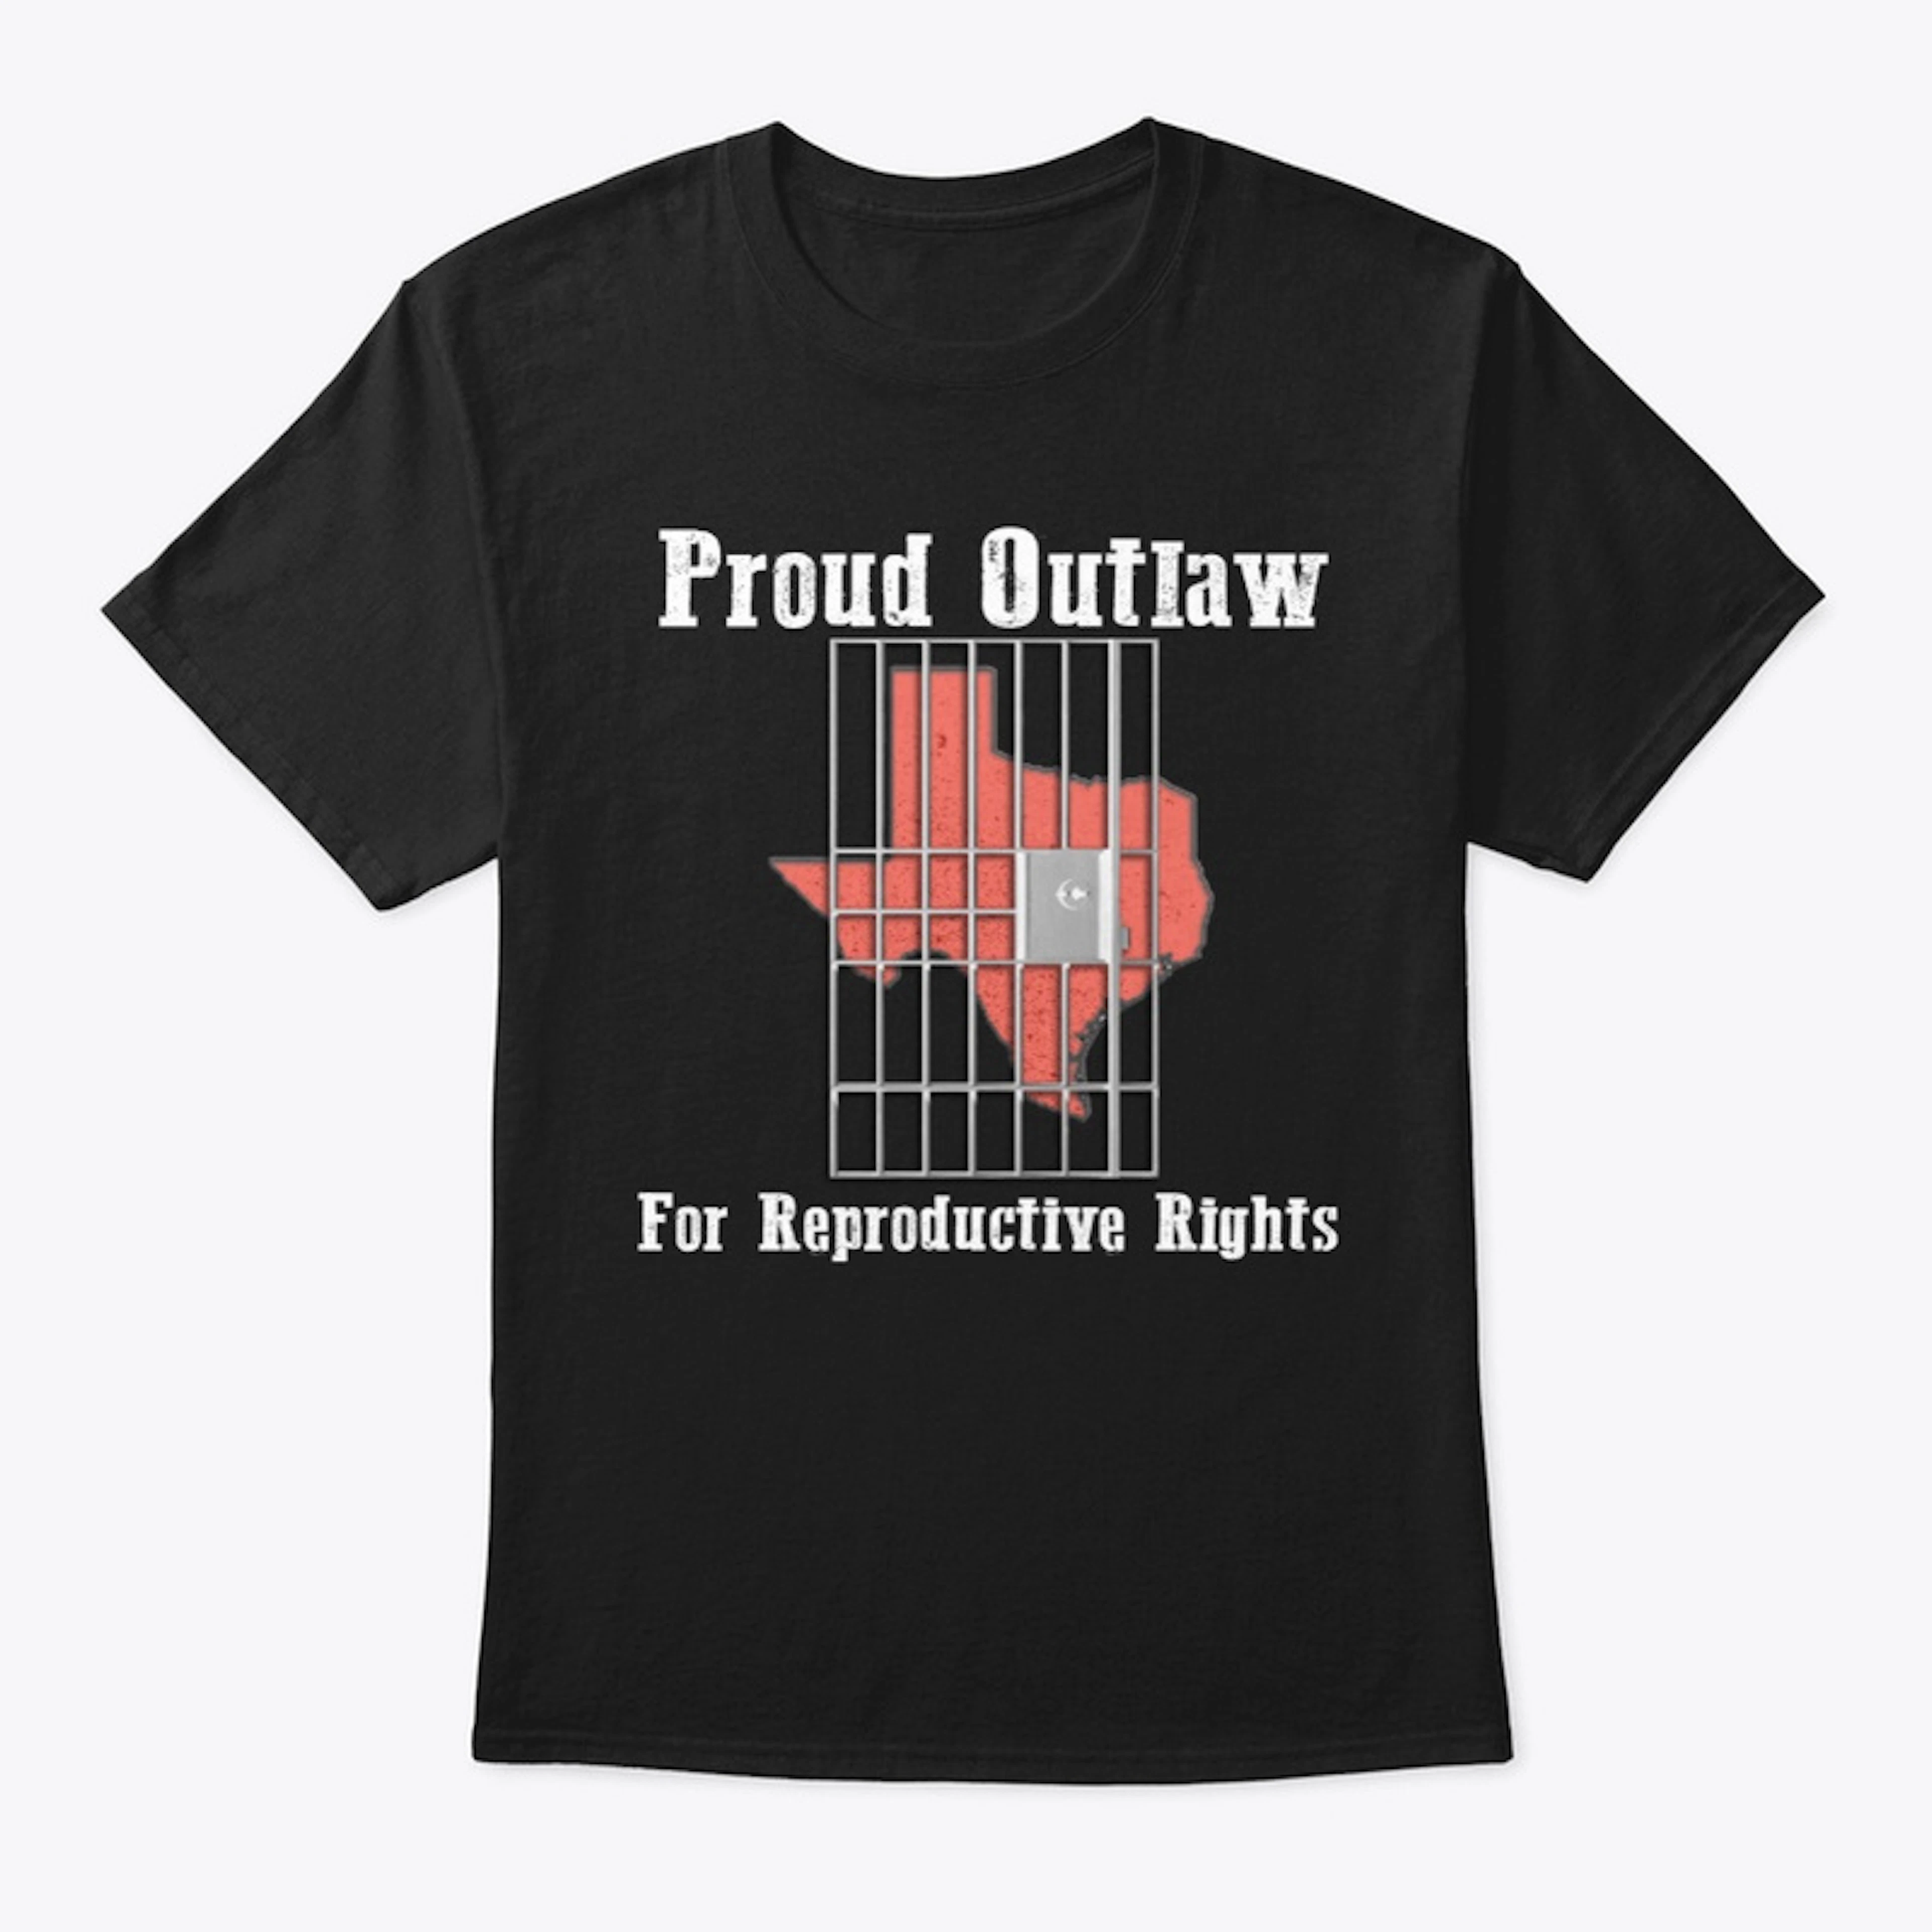  Proud Outlaw for Reproductive Rights